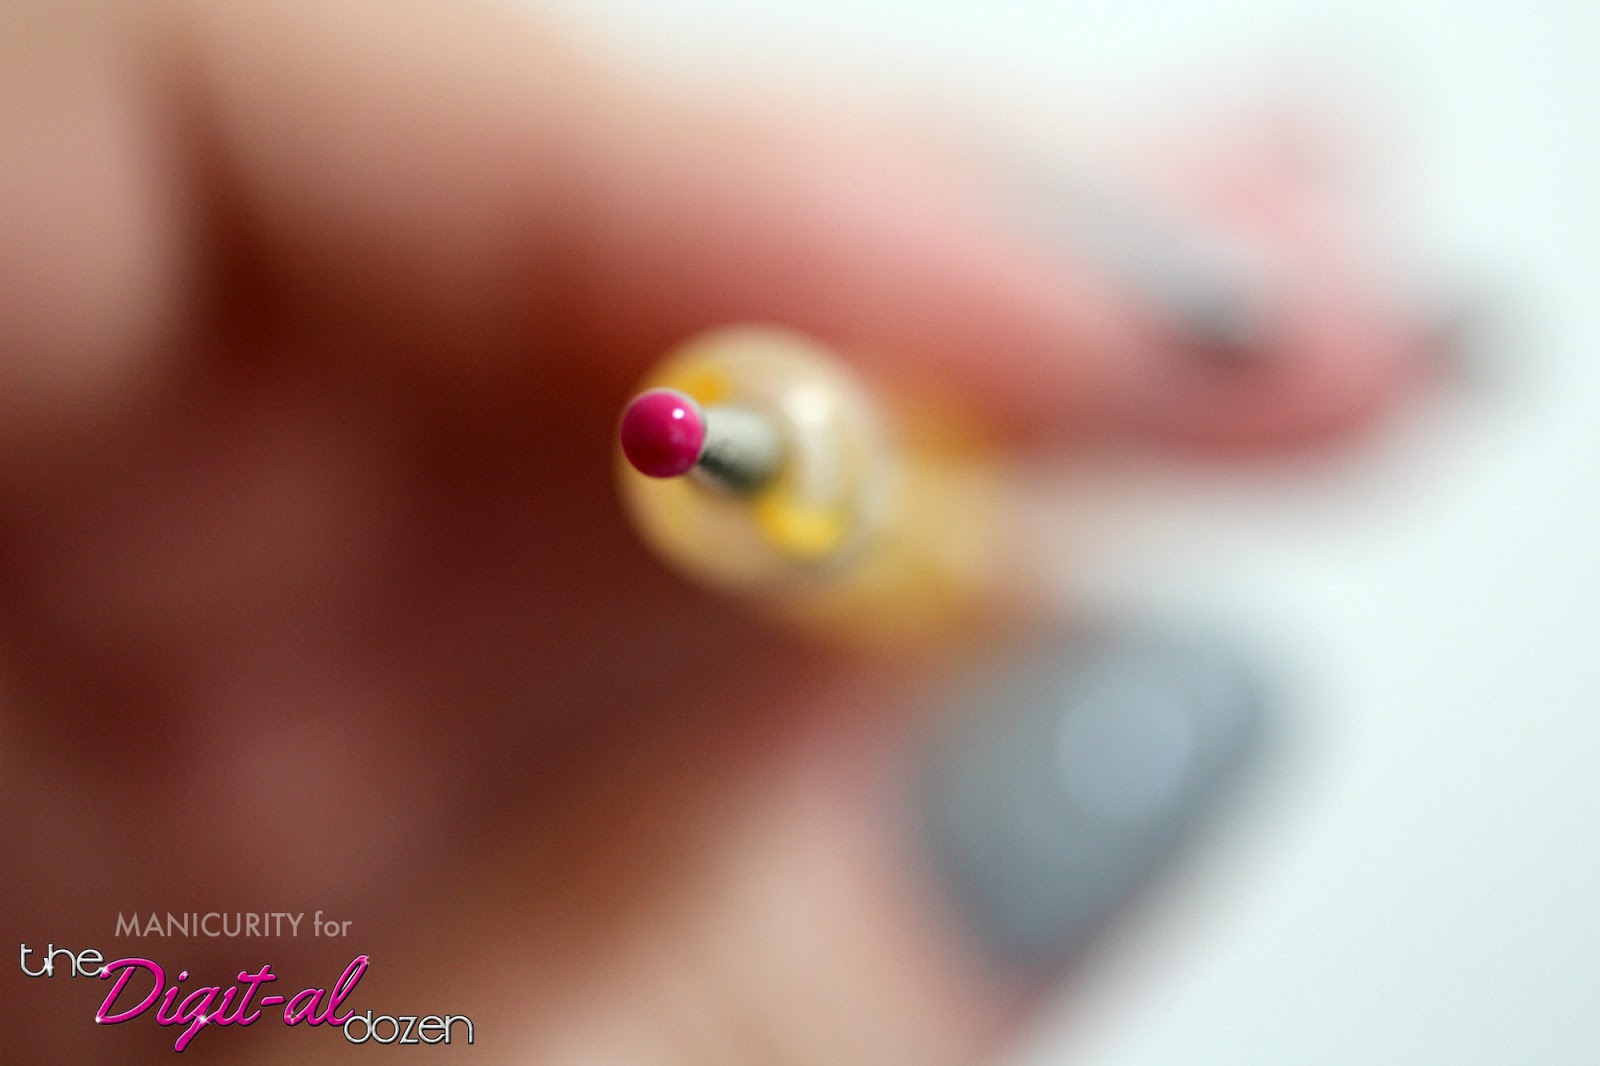 Dotting Tools 101: The Definitive Guide to Getting Dotty - How to Use Dotting Tools for Nail Art (Tips, Tutorial) by Manicurity for The Digital Dozen